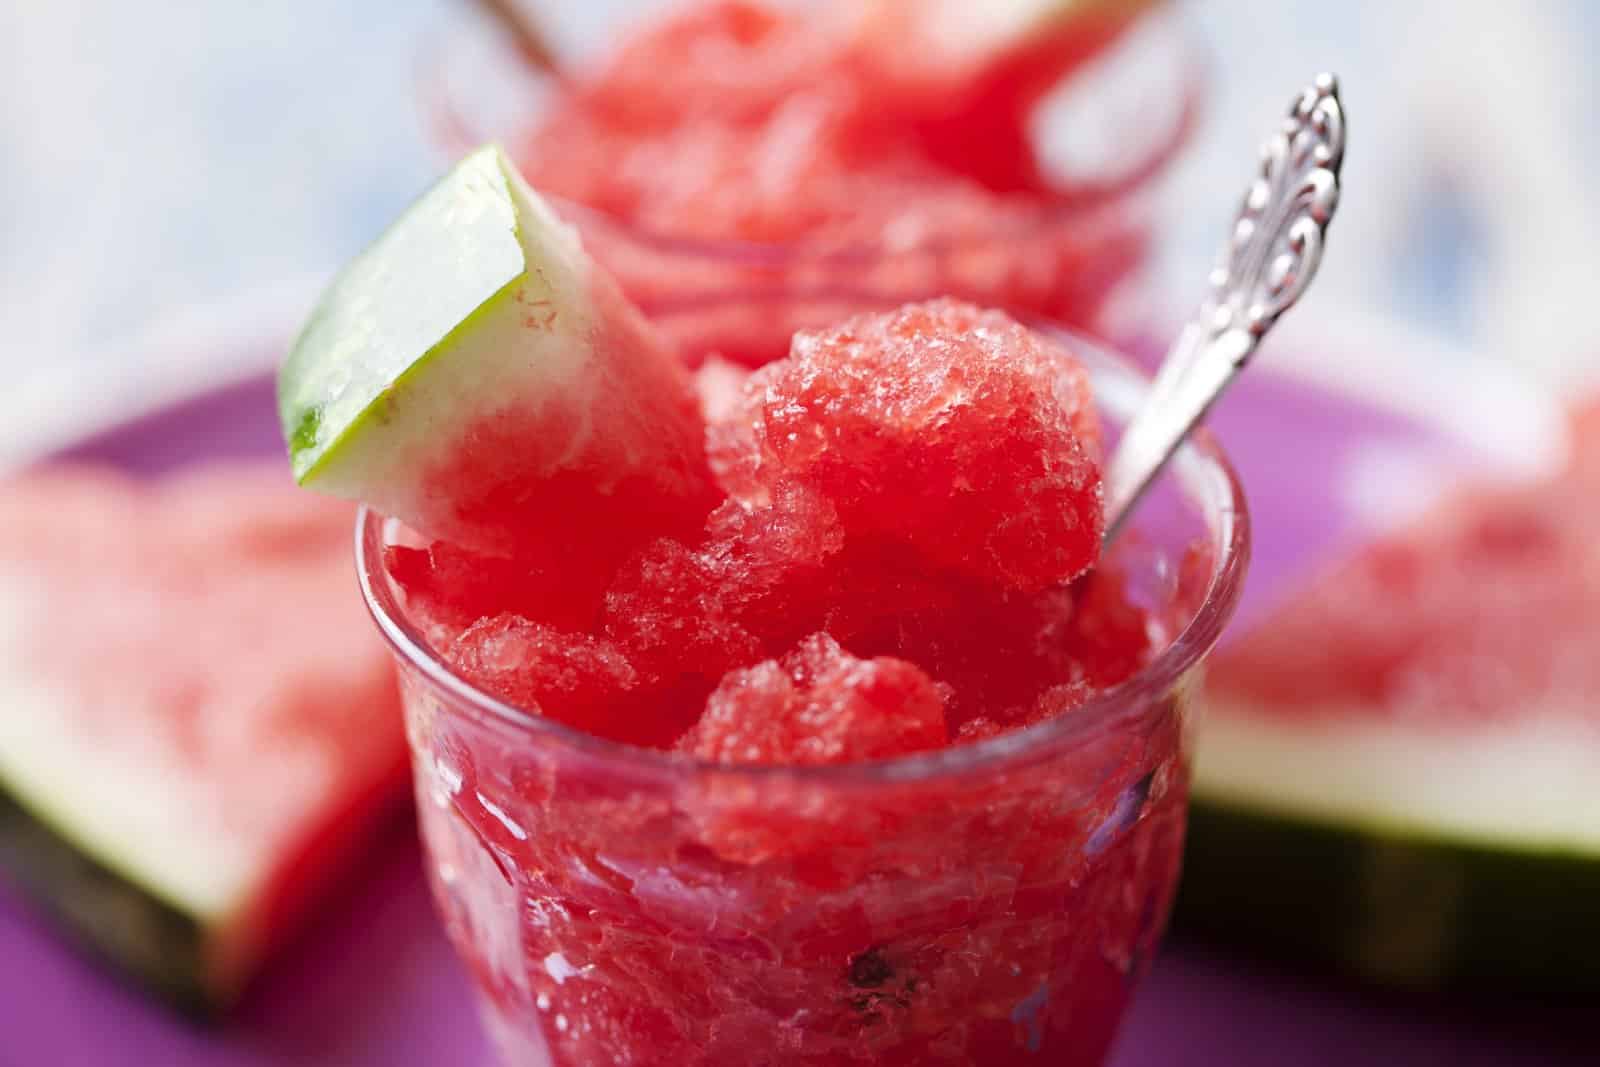 Image Credit: Shutterstock / Liv friis-larsen <p><span>Cool off with a refreshing granita, a Sicilian specialty that’s as vibrant and flavorful as the island itself. Made from freshly squeezed fruit juice or coffee, sweetened with a hint of sugar, and frozen until slushy, granita is the perfect afternoon pick-me-up on a hot summer day. Sample it in Noto, where the tradition of granita-making dates back centuries, and savor the authentic flavors of Sicily in every spoonful.</span></p>